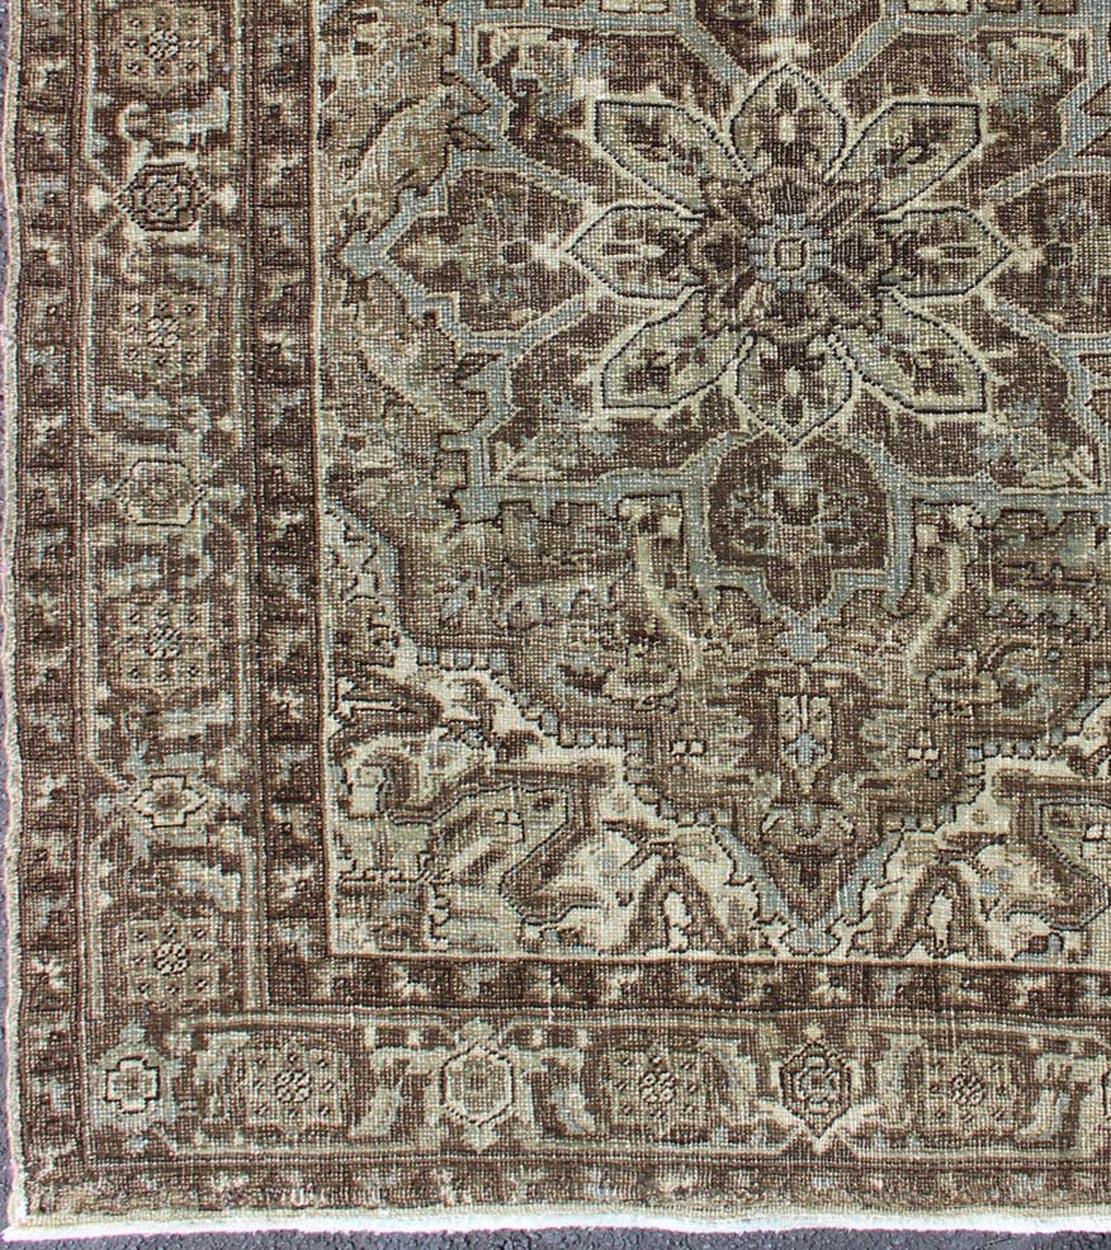 Midcentury Persian carpet with layered Medallion and Motifs, rug ca-1171, country of origin / type: Iran / Heriz, circa mid-20th century

This vintage Persian Heriz rug features a dark, natural-toned geometric design. The bold design is grounded